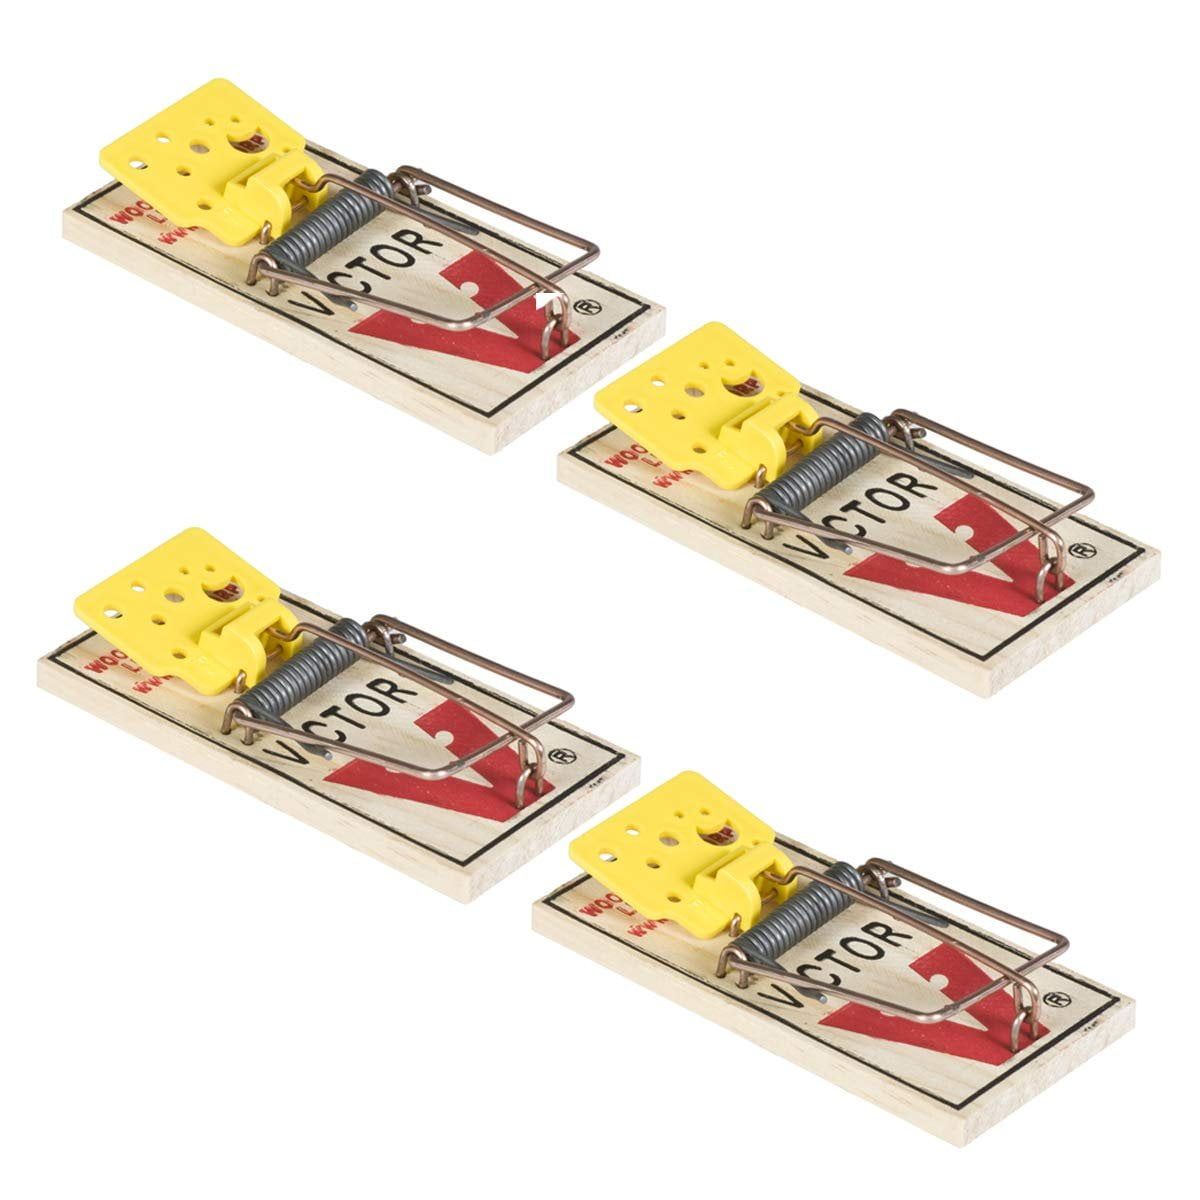 Victor Easy Set M039 Clipstrip Disposable Mouse Trap